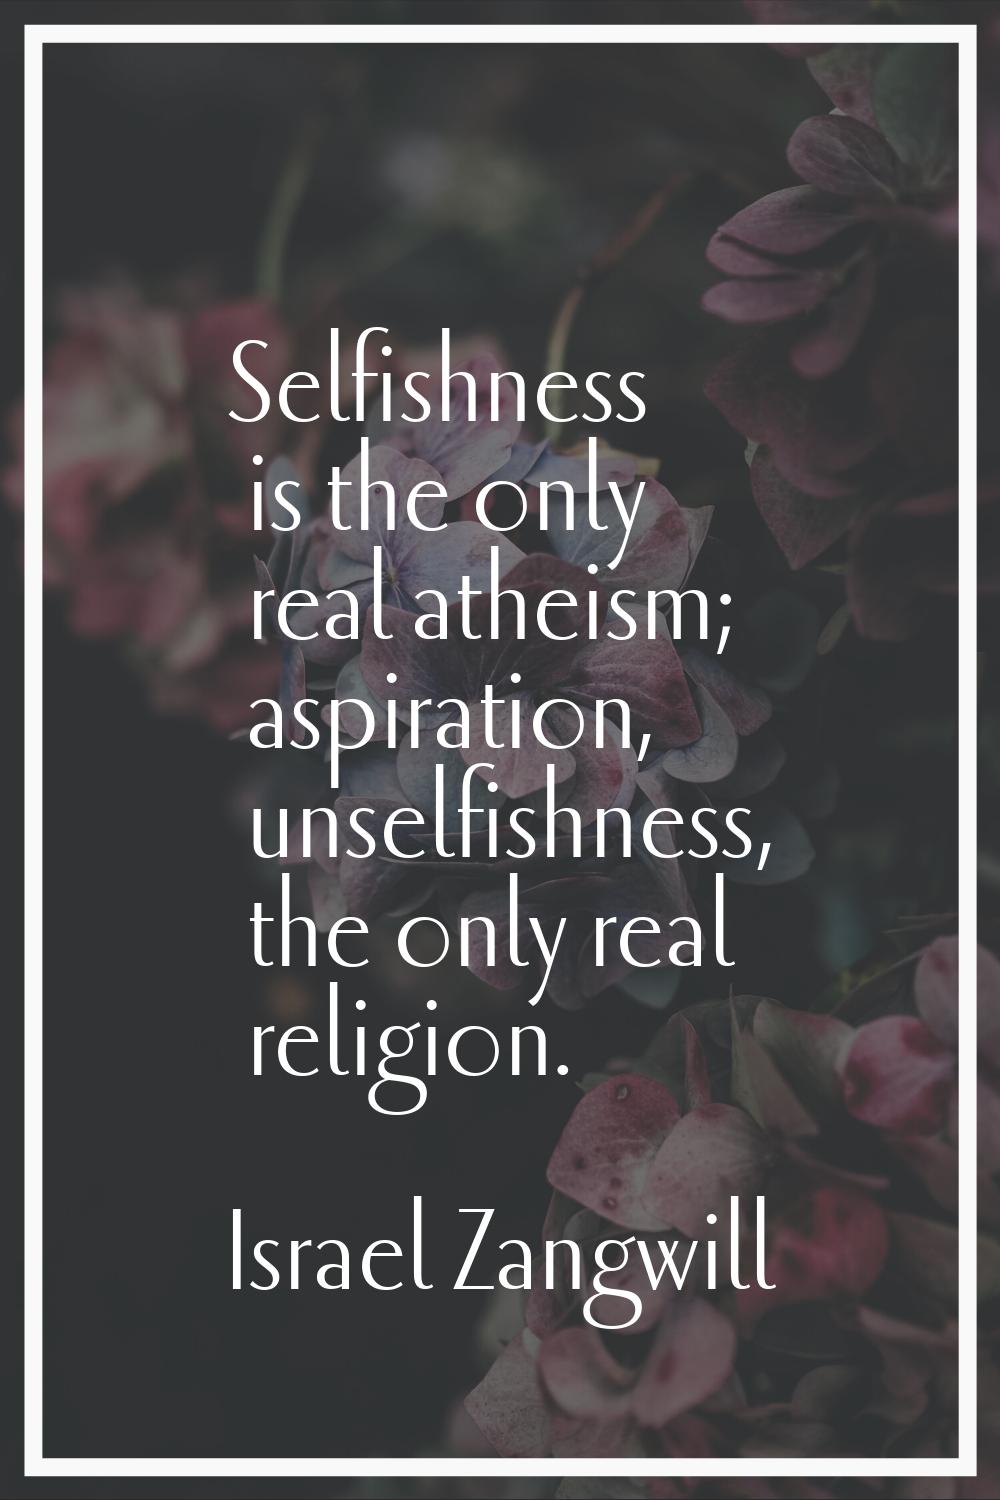 Selfishness is the only real atheism; aspiration, unselfishness, the only real religion.